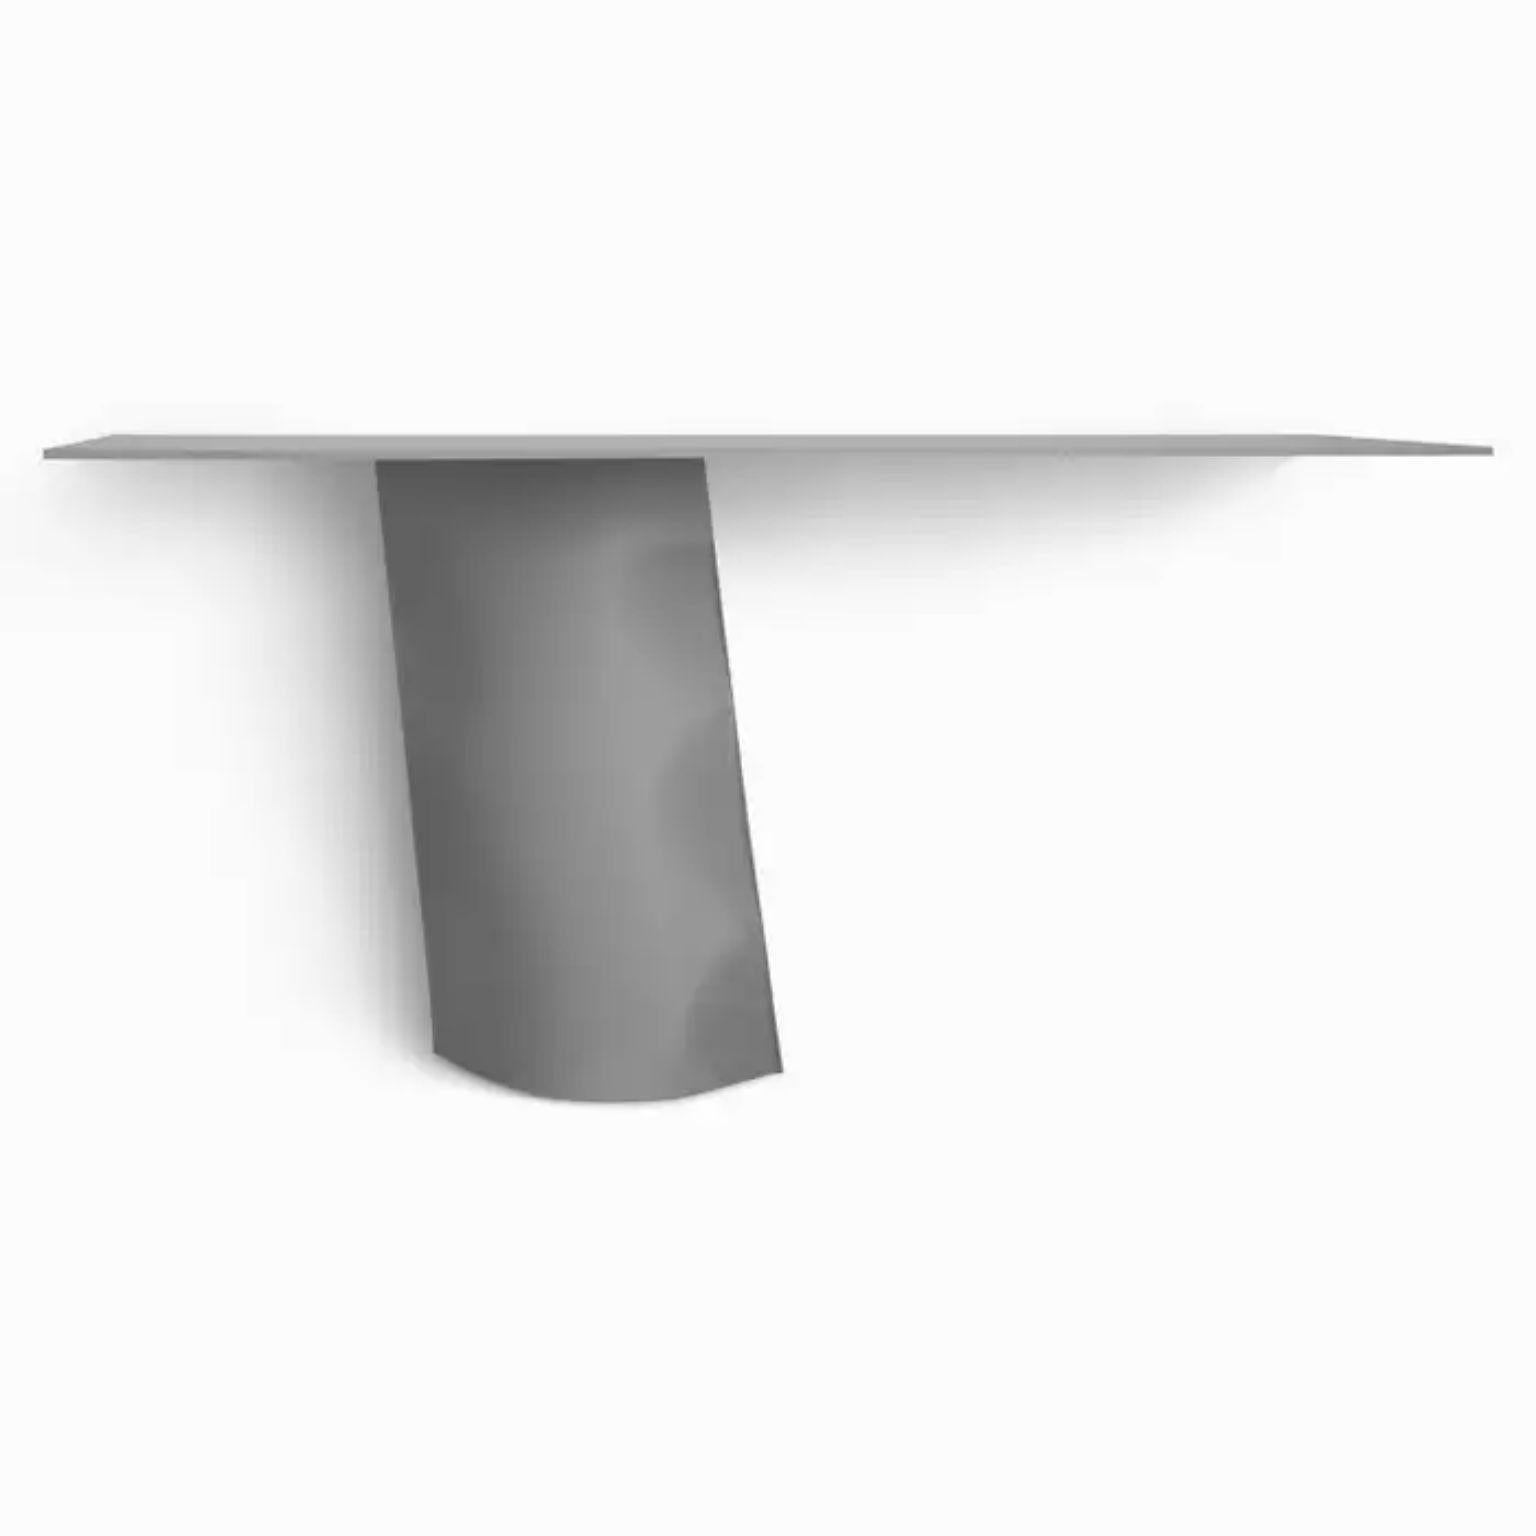 Carbon Steel Parova Console Mono by Zieta
Dimensions: D 43 x W 161 x H 80 cm. 
Material: Carbon steel.

Available in different finishes and materials. Please contact us.

Parova Console is a new object in the Parova series, which is distinguished by